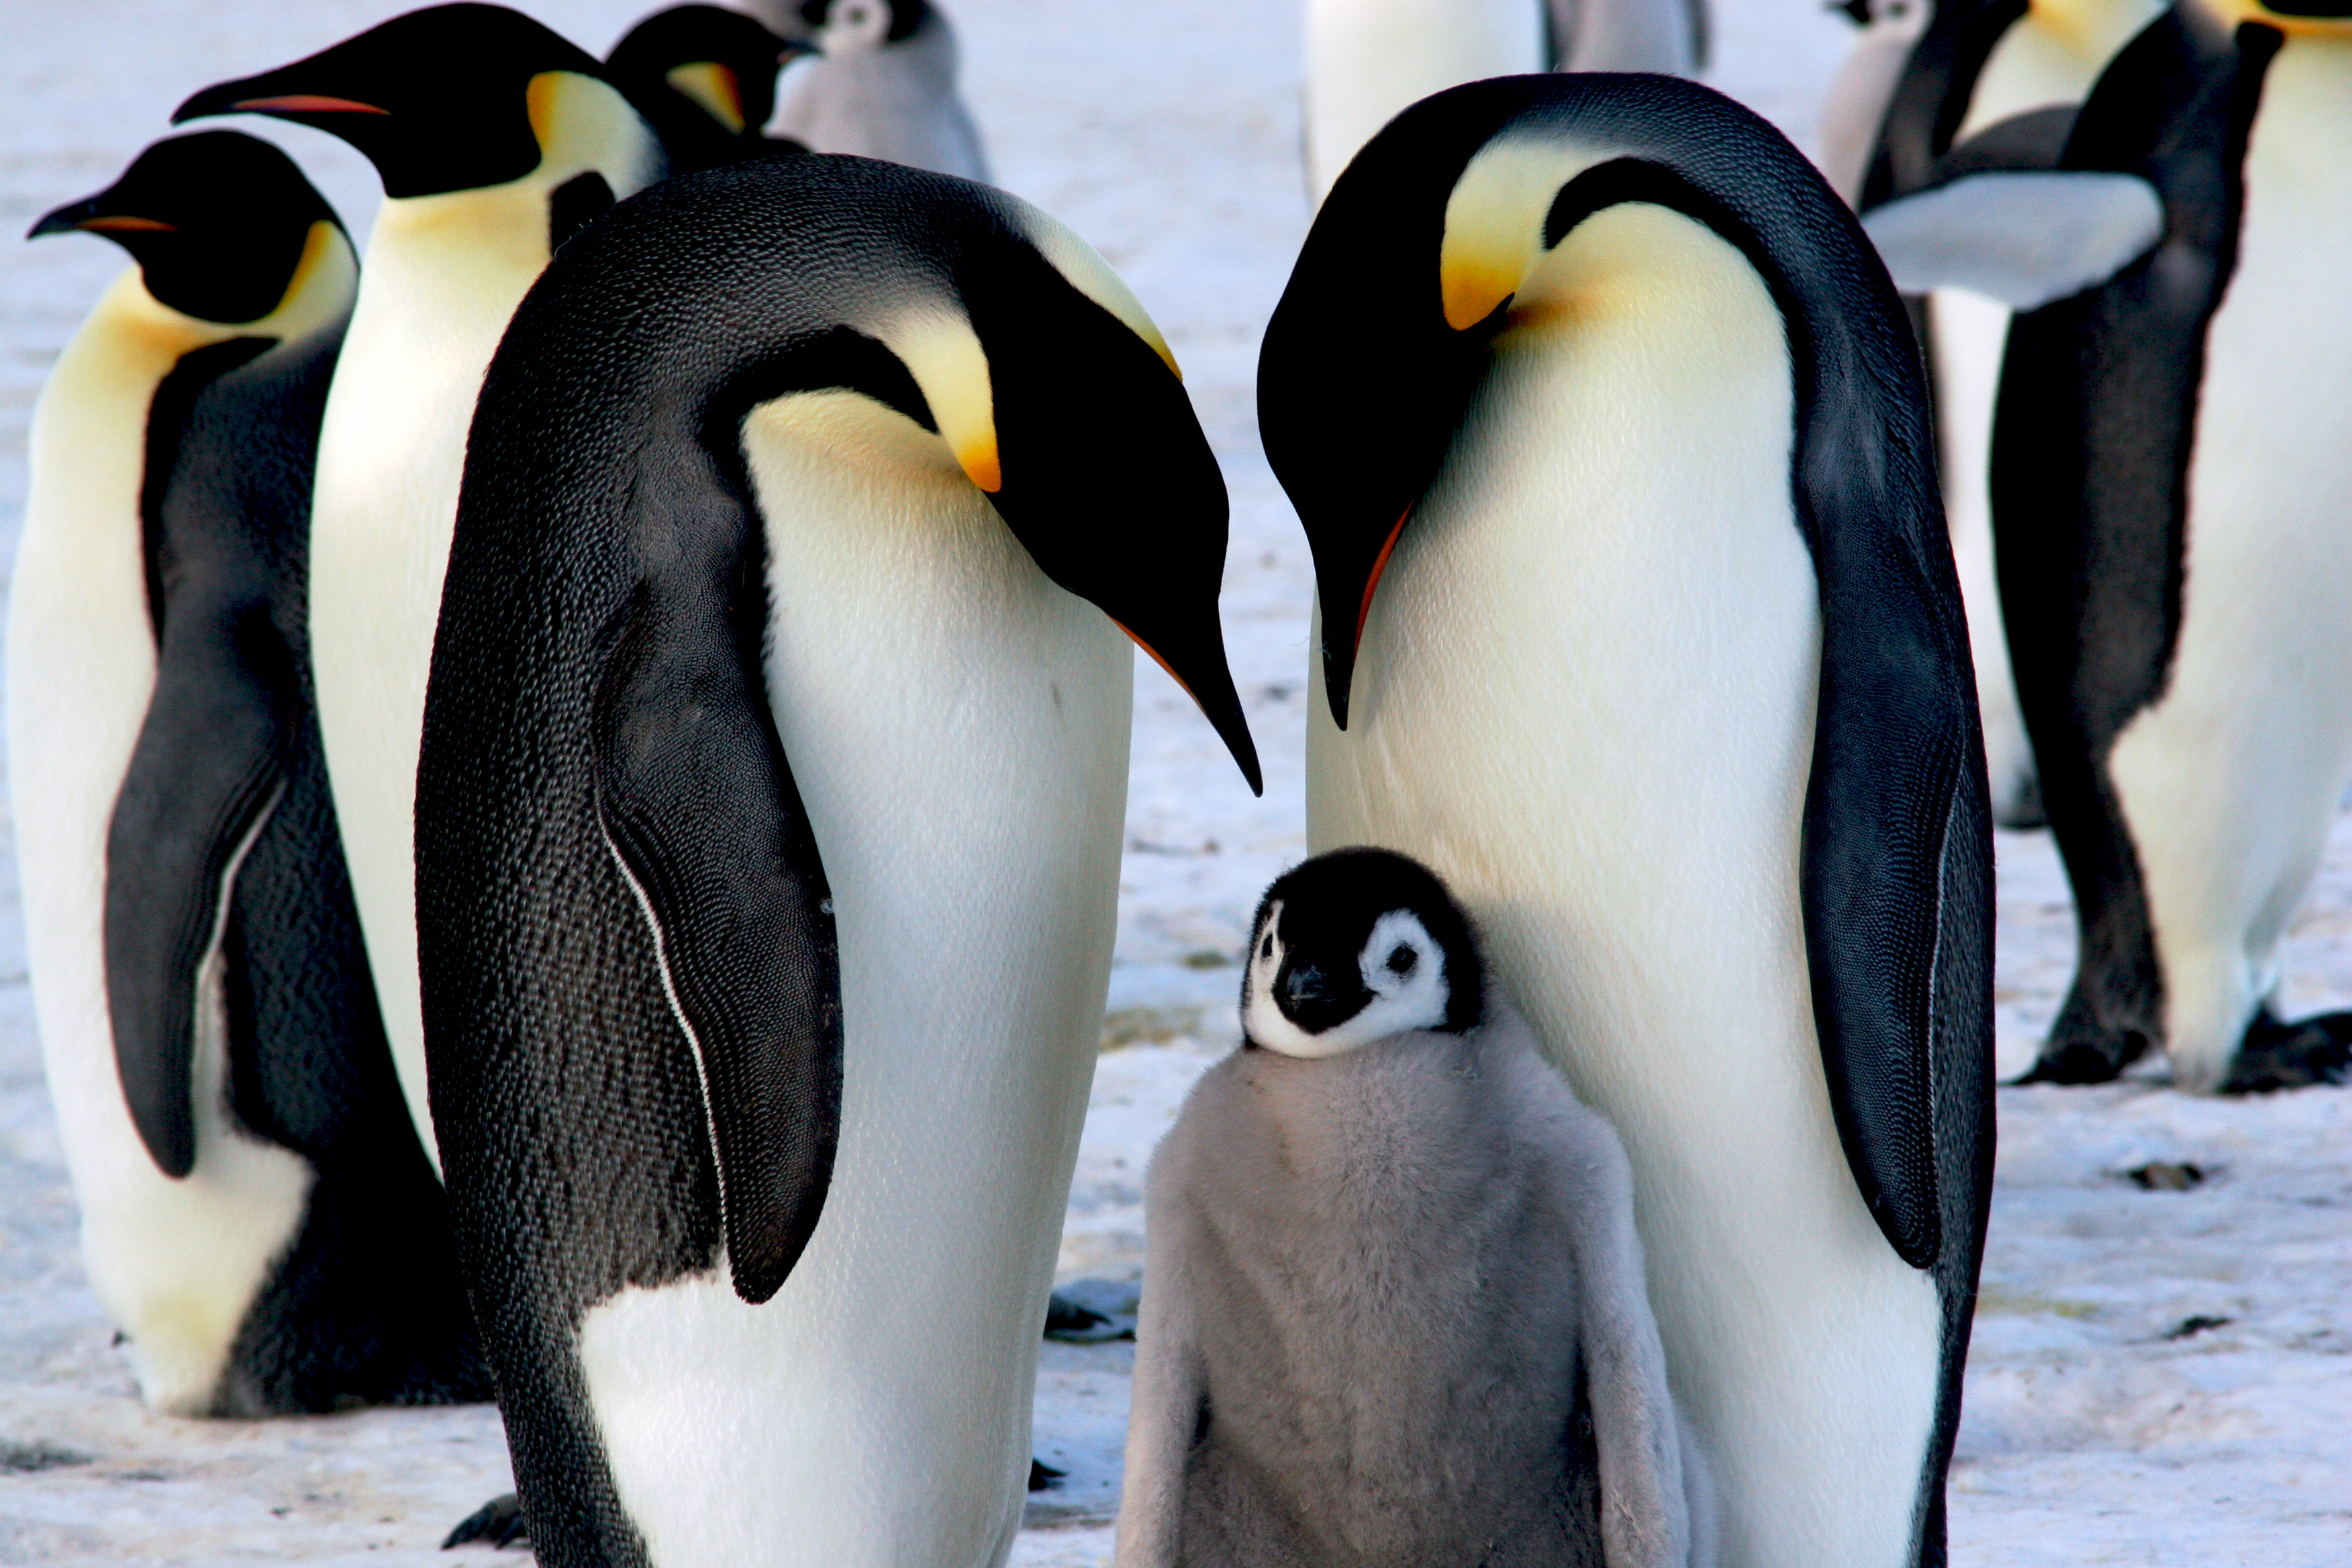 Emperor penguins are failing to breed